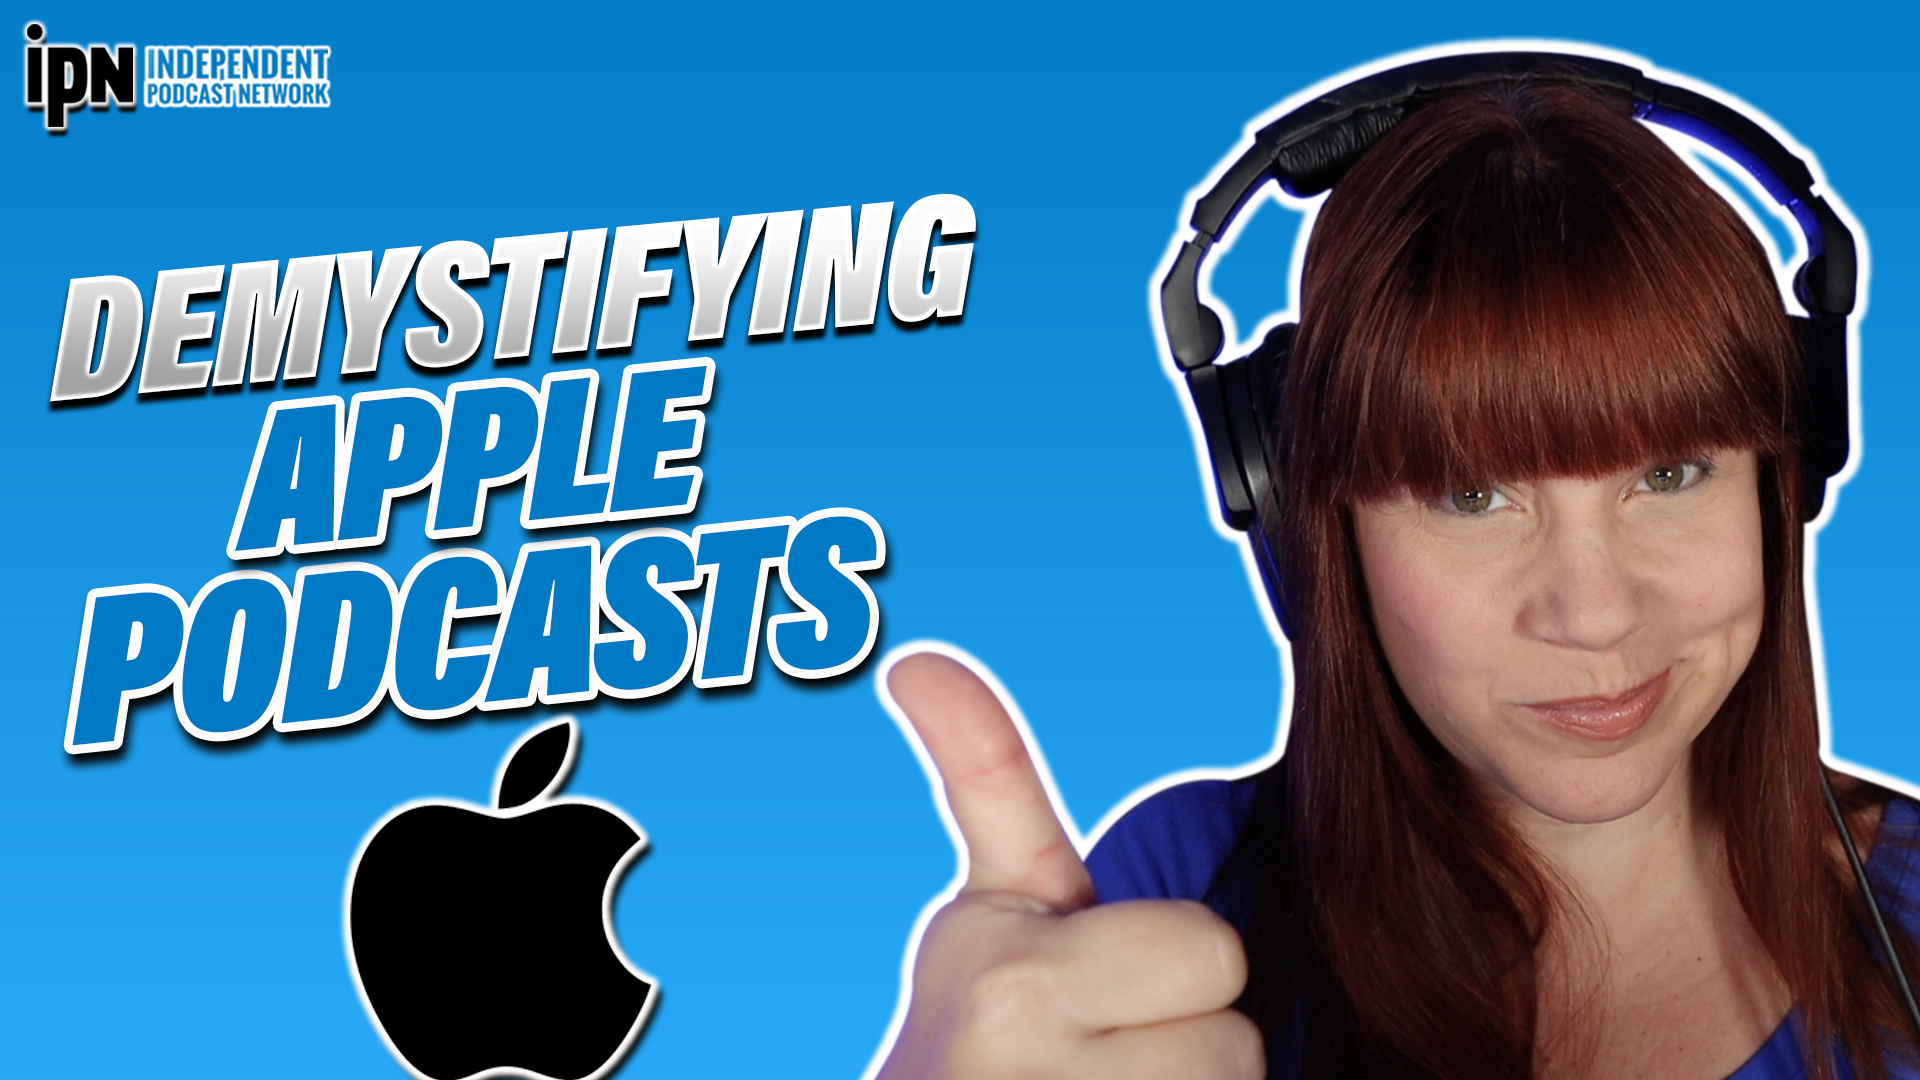 Apple Podcasts What Podcasters Need To Know Independent Podcast Network 